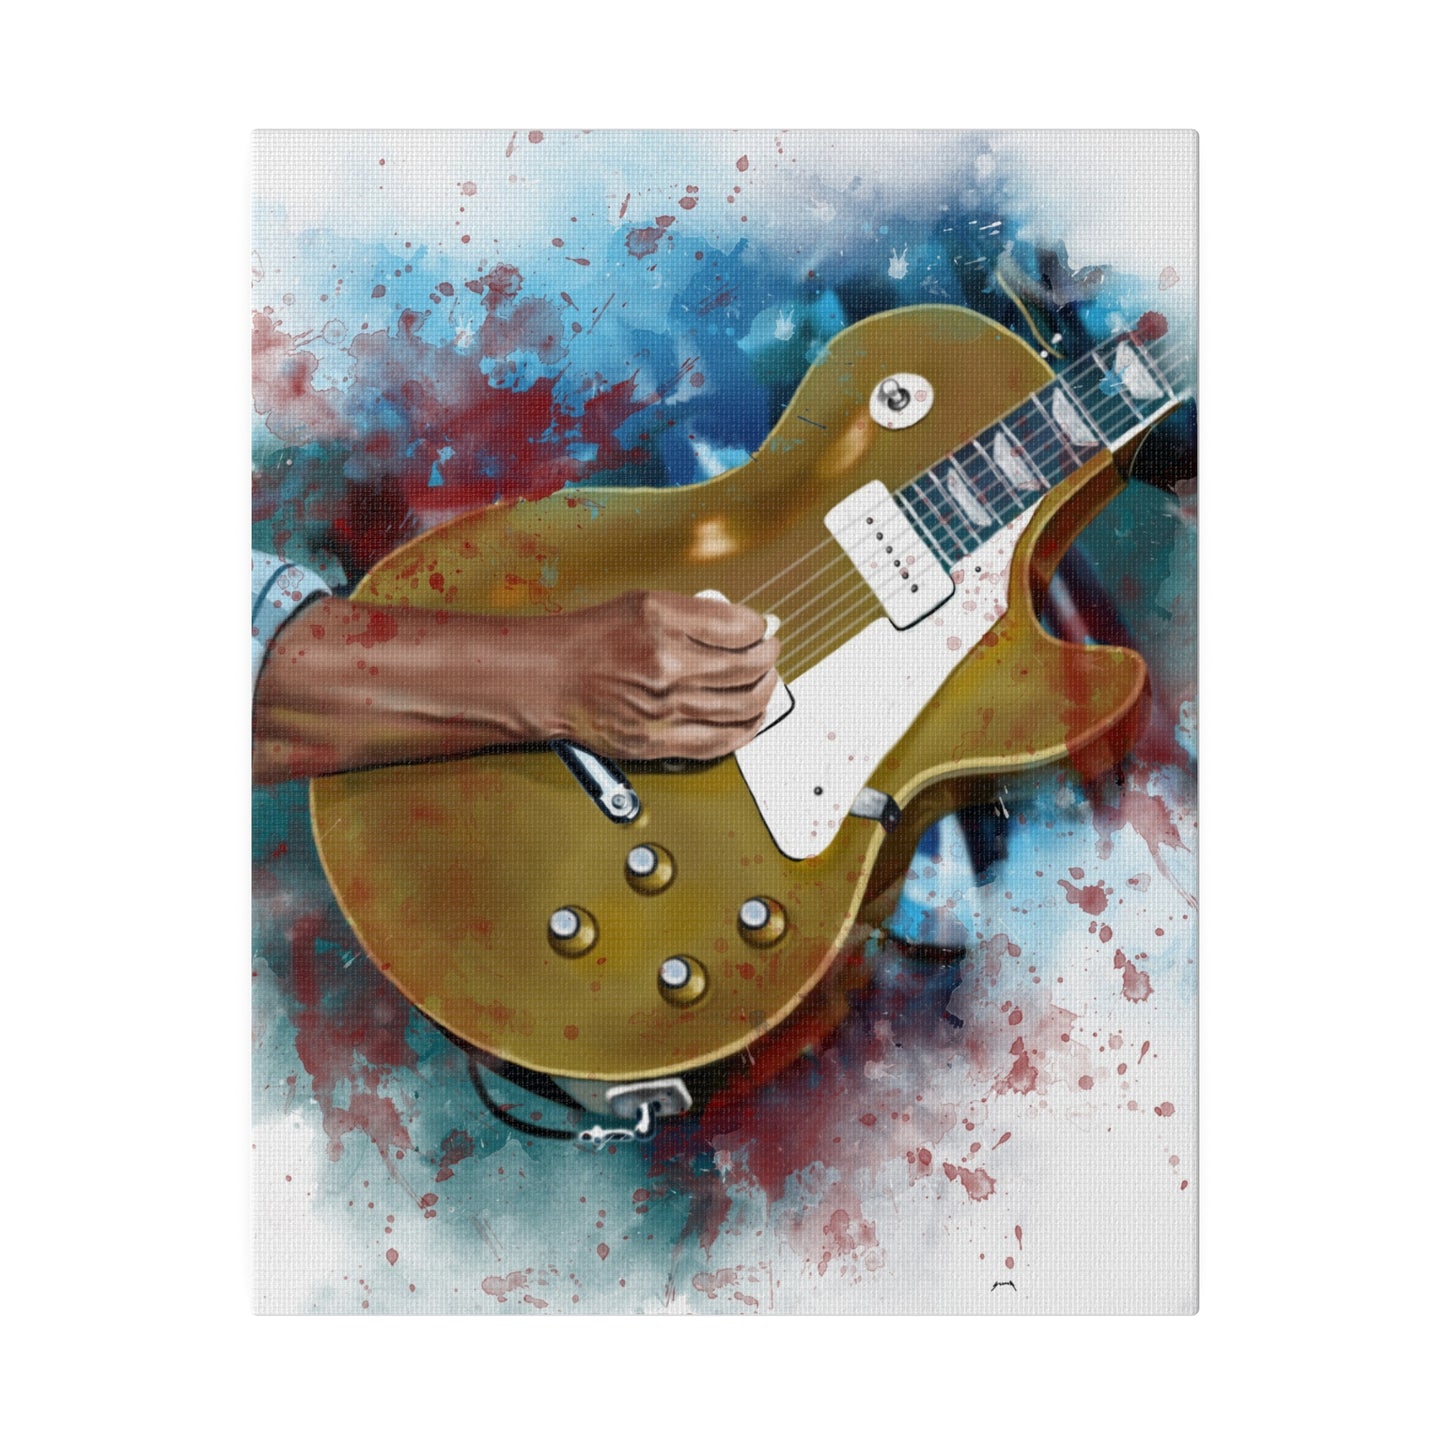 Digital painting of a goldtop electric guitar printed on canvas